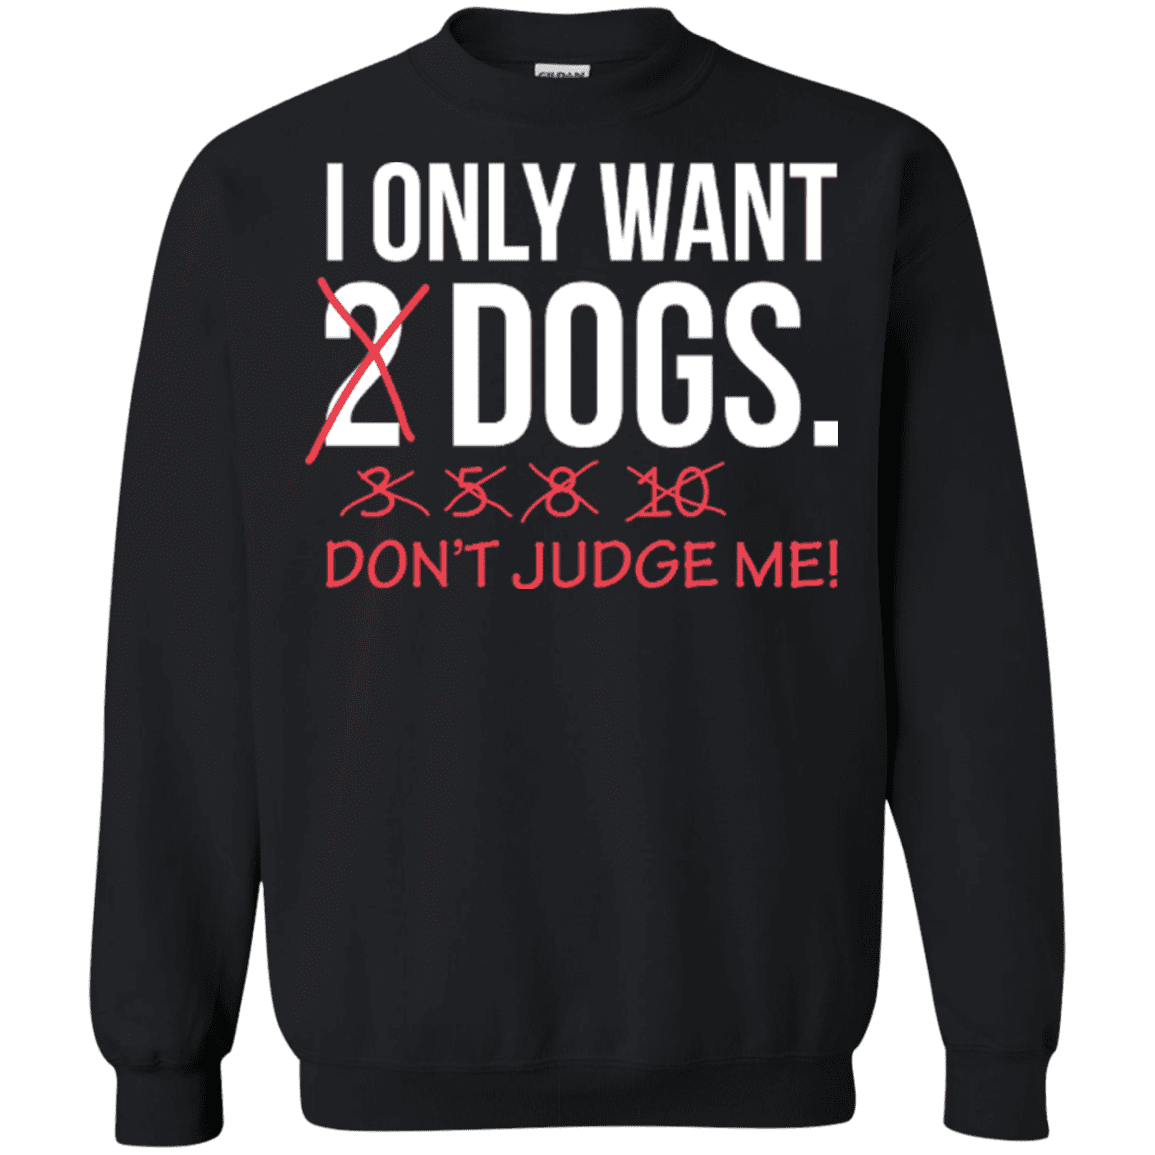 I Only Want 2 Dogs - Sweatshirt.